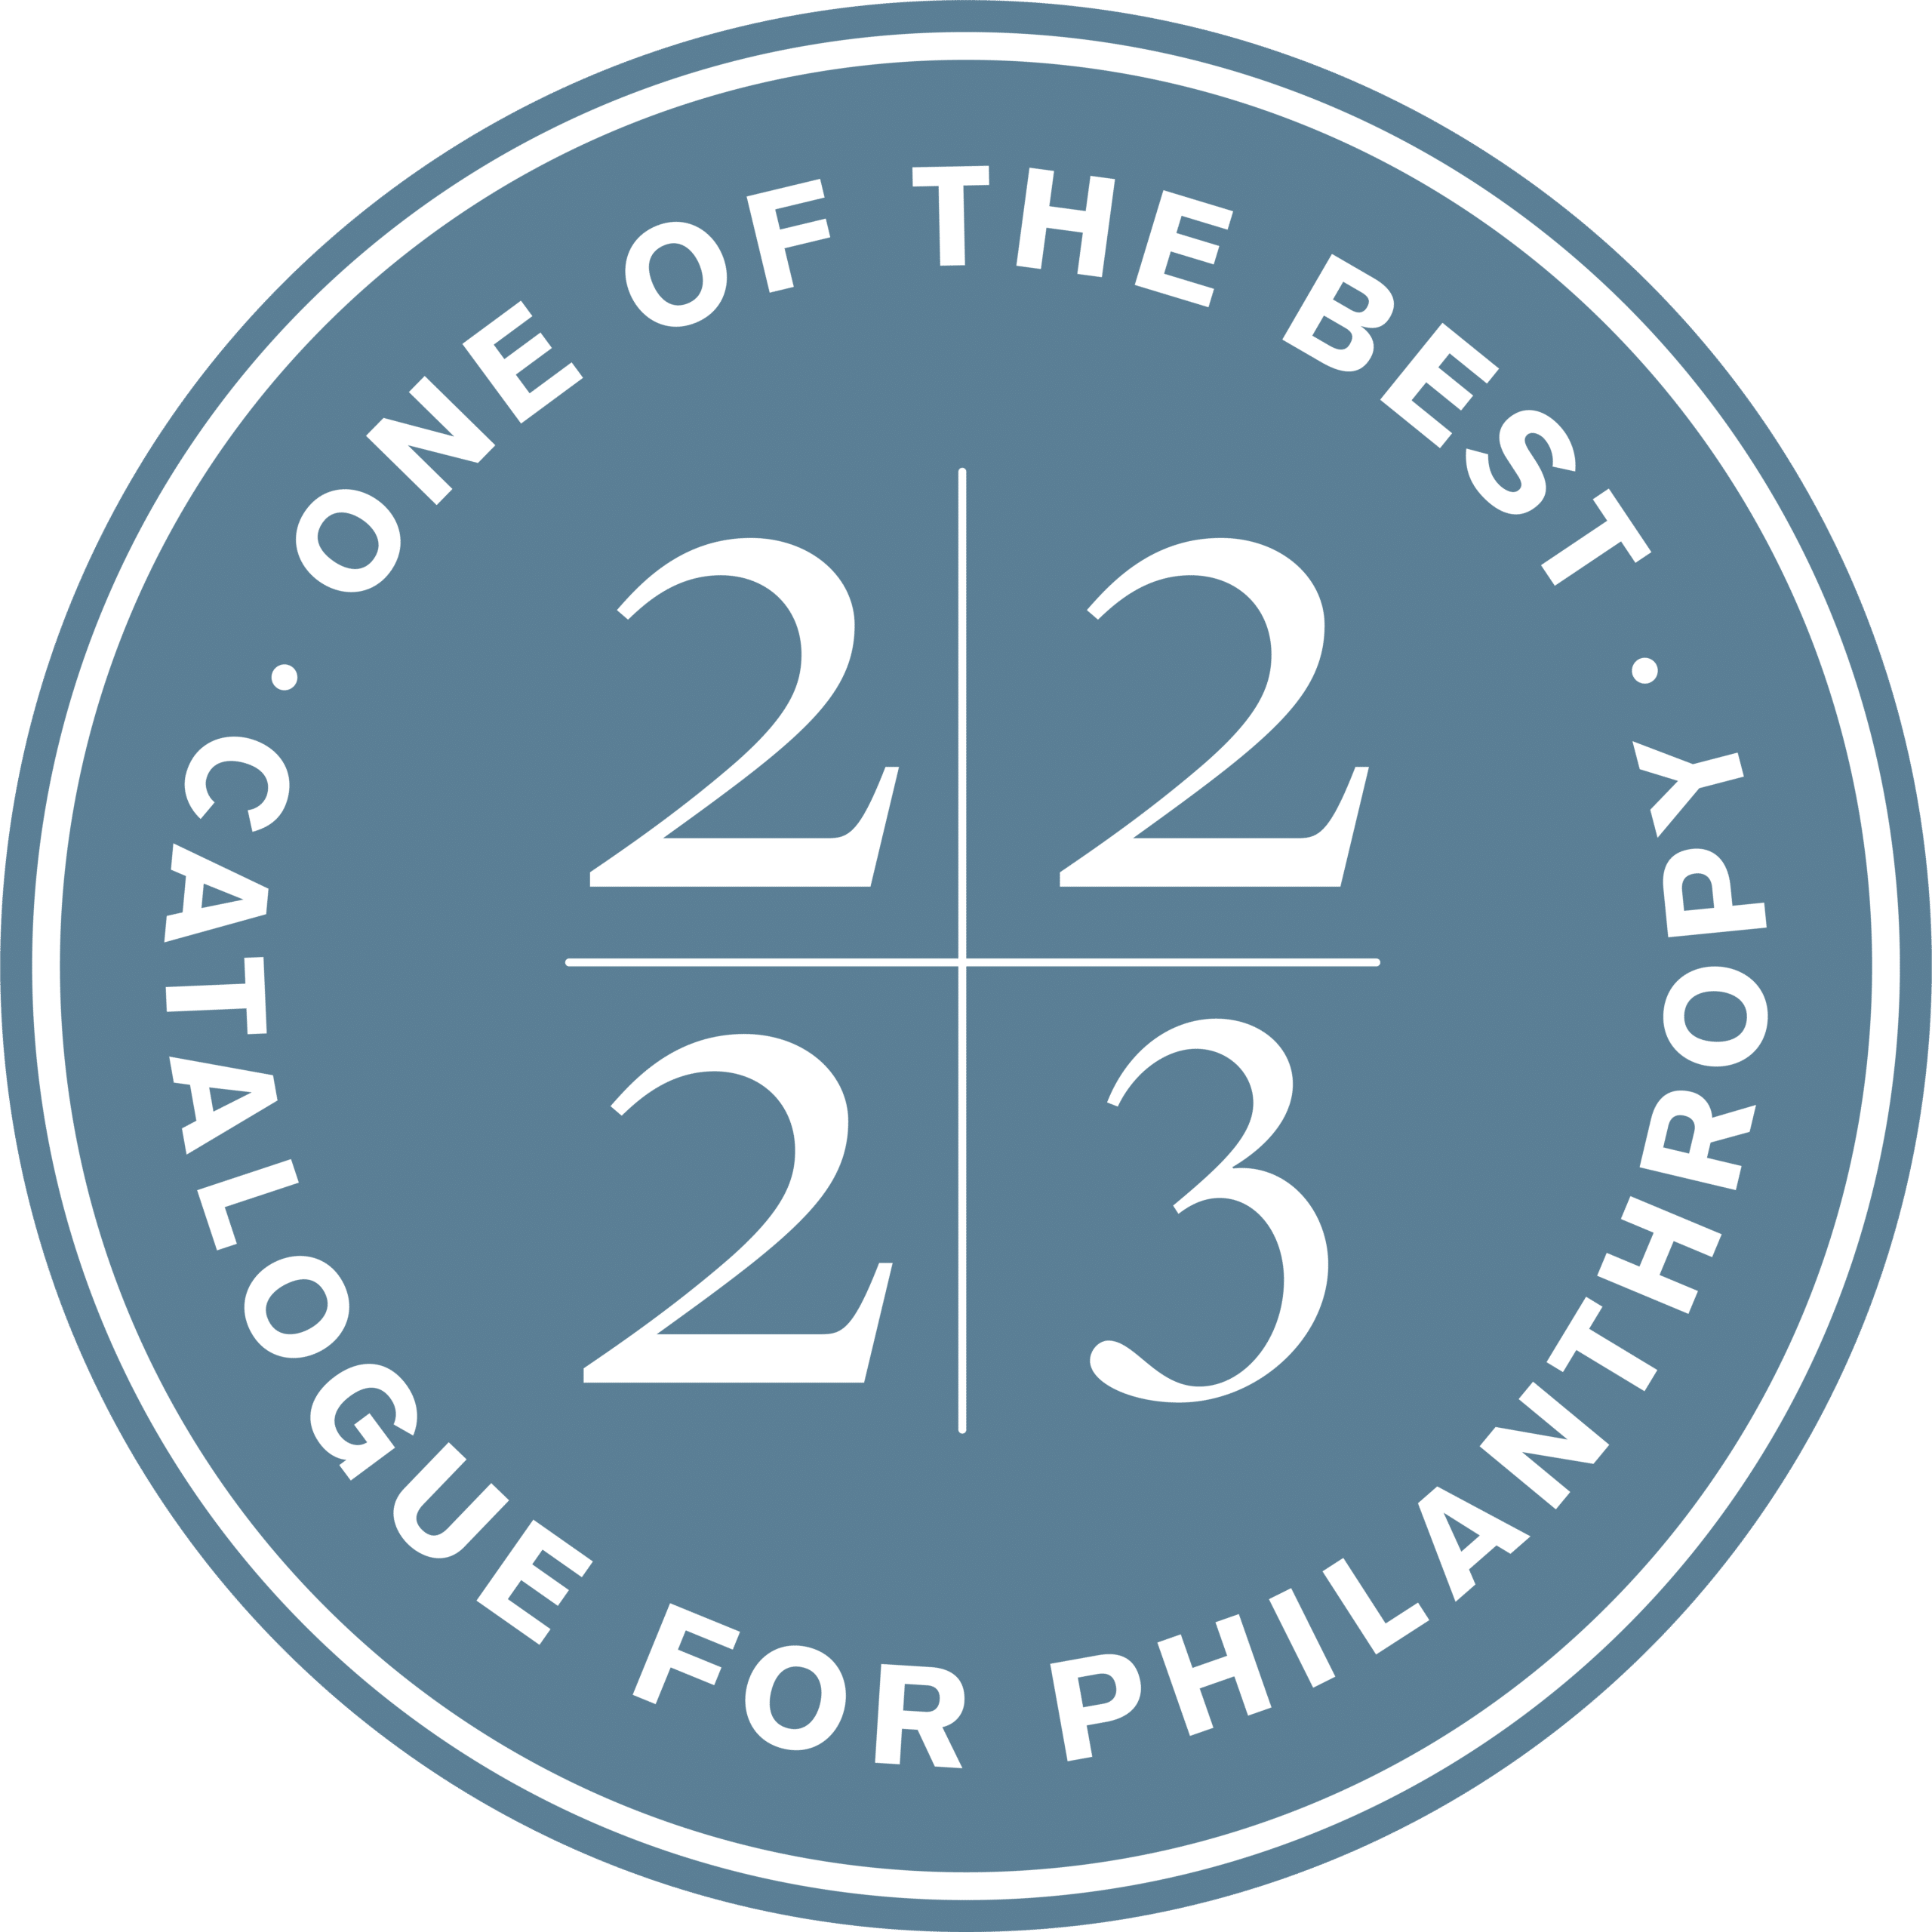 Catalogue for Philanthropy - One of the Best - 2022-23